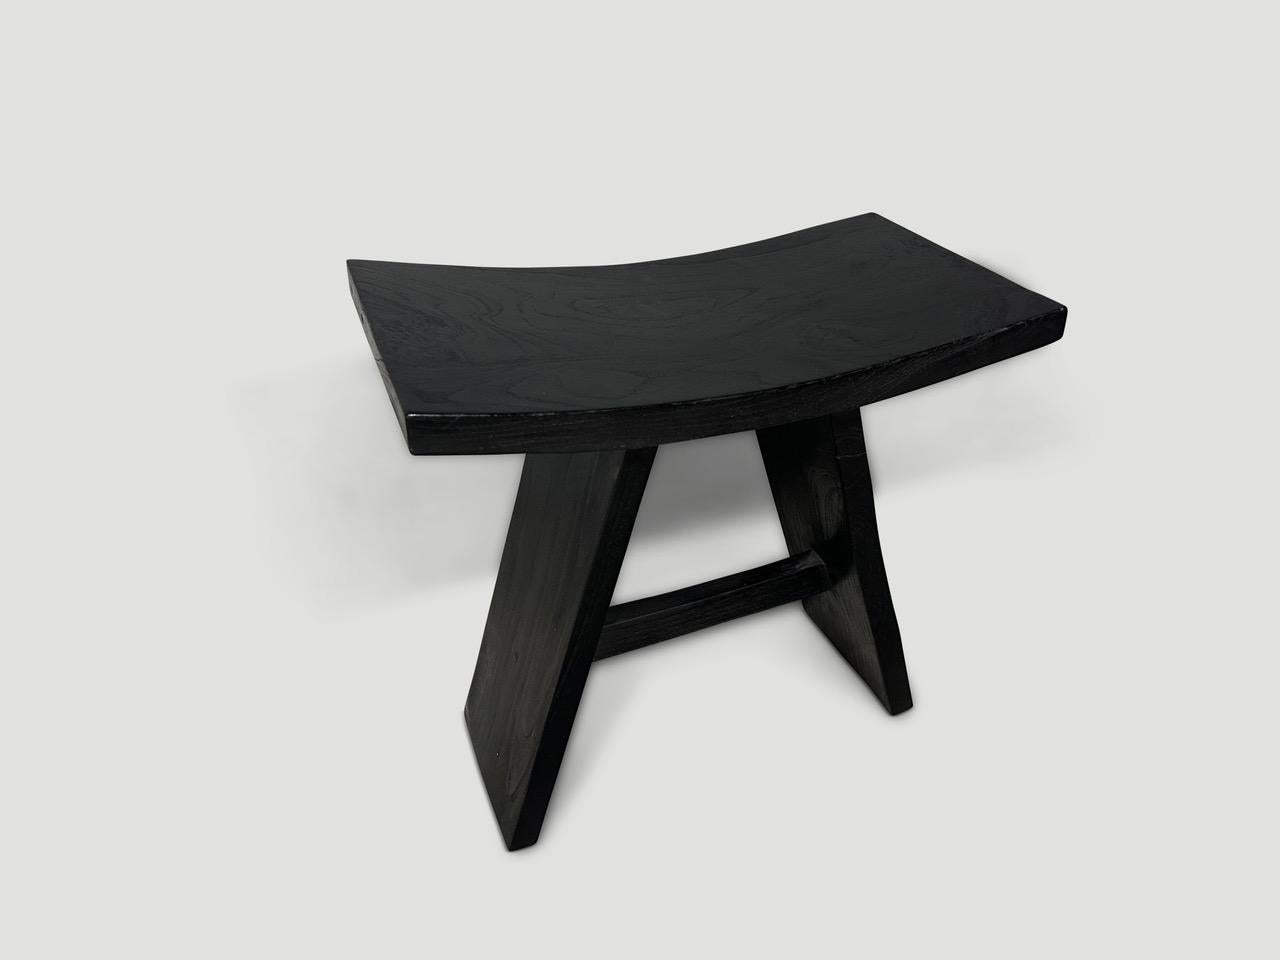 Andrianna Shamaris Minimalist Espresso Teak Wood Bench In Excellent Condition For Sale In New York, NY